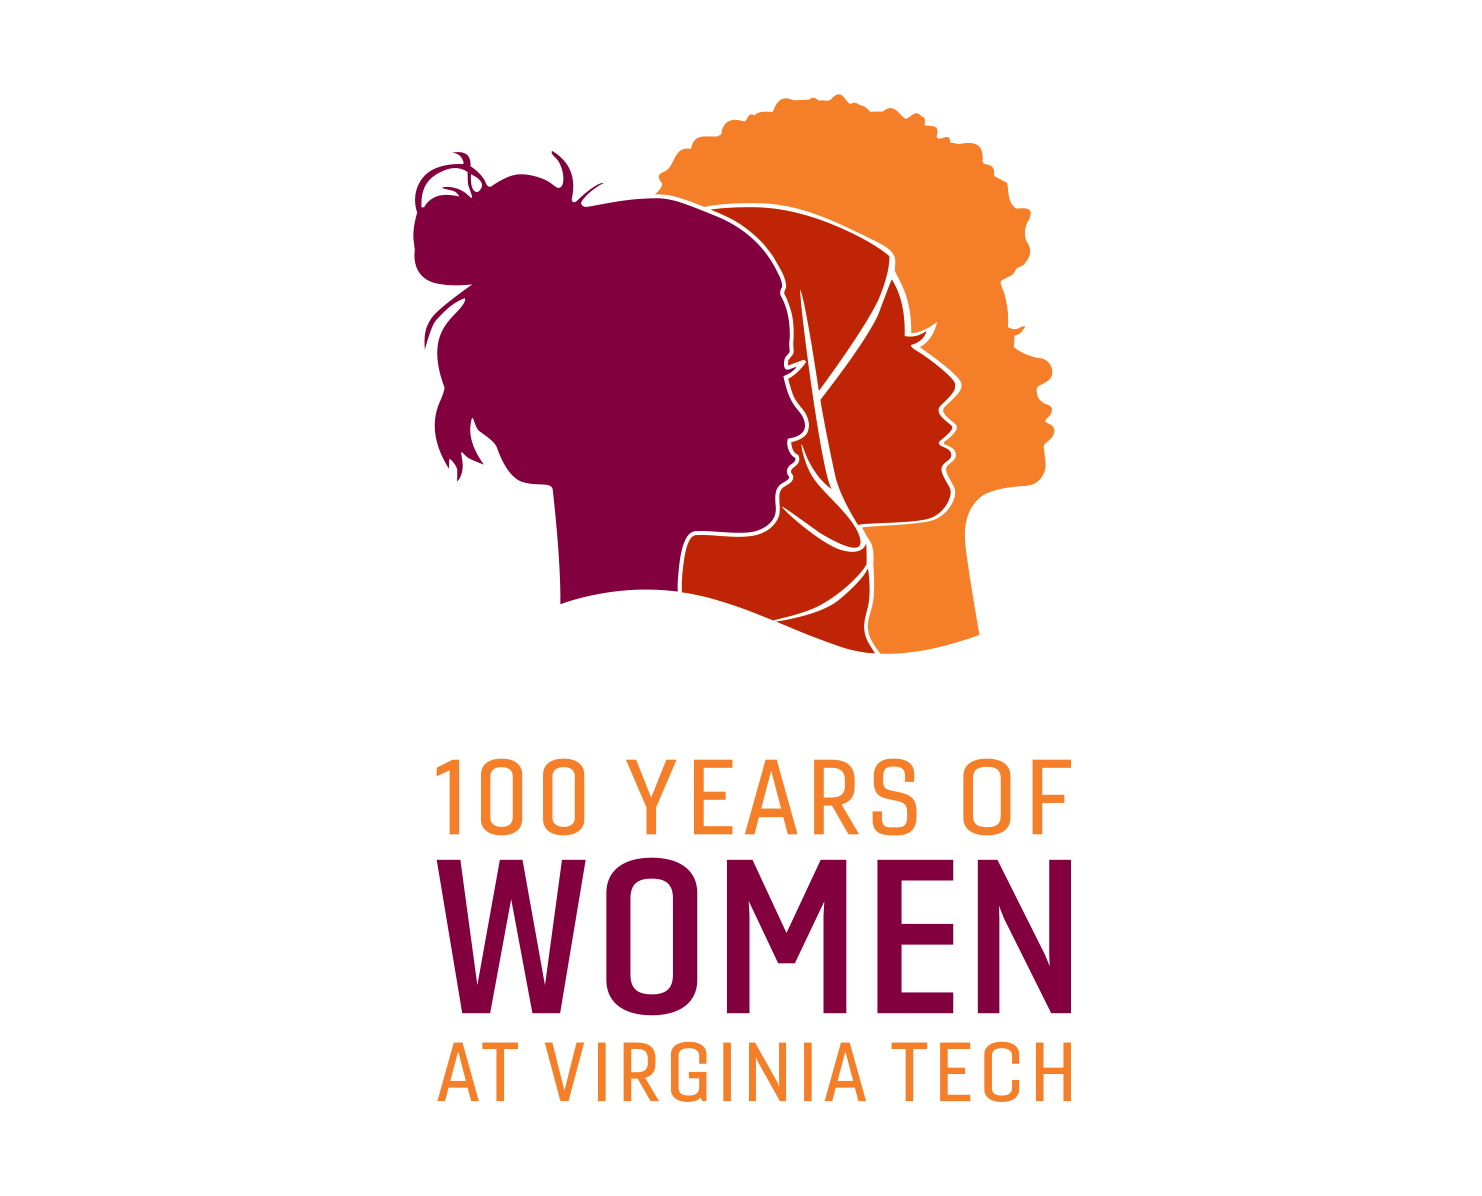 An illustration of silhouette profiles of three women all looking to the right; one with an afro, one with a hijab, and one with a messy bun. Underneath is a caption “100 Years of Women at Virginia Tech”.